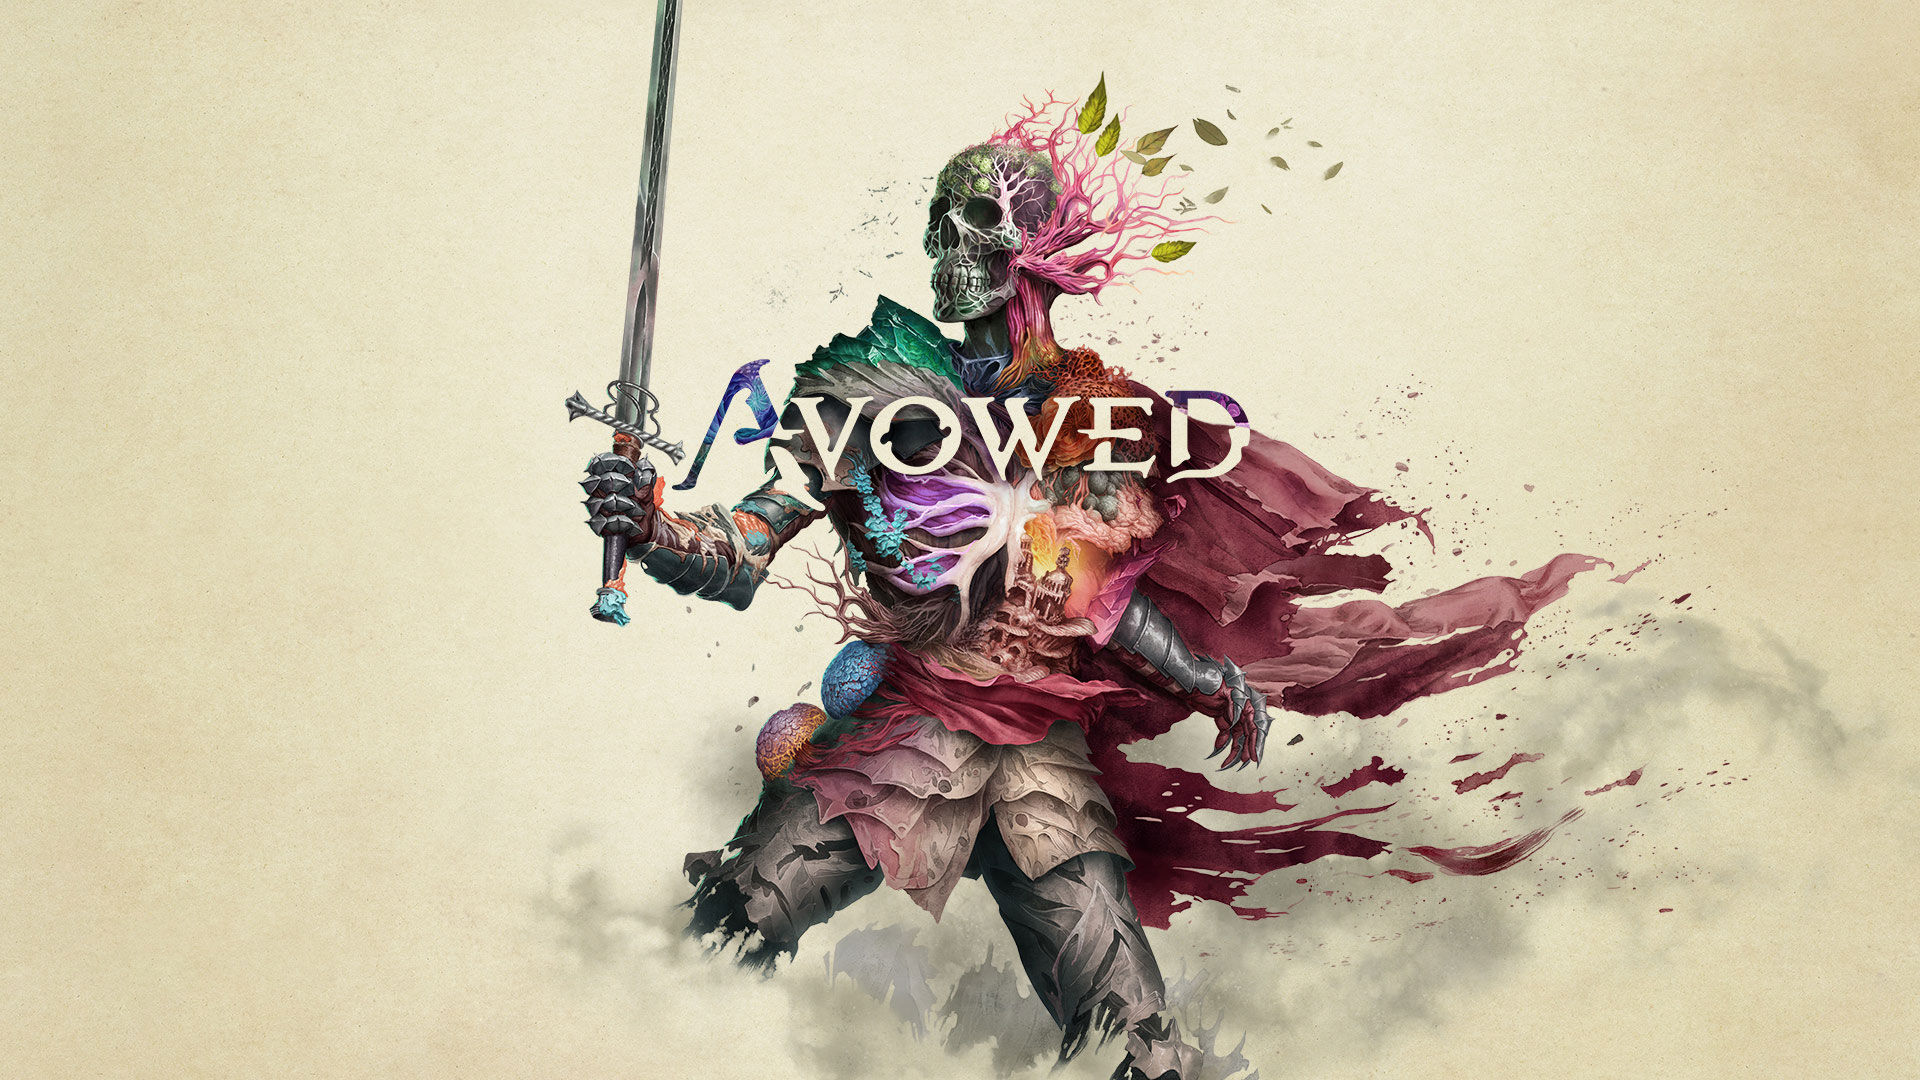 Learn more about Avowed's gameplay and dynamic combat